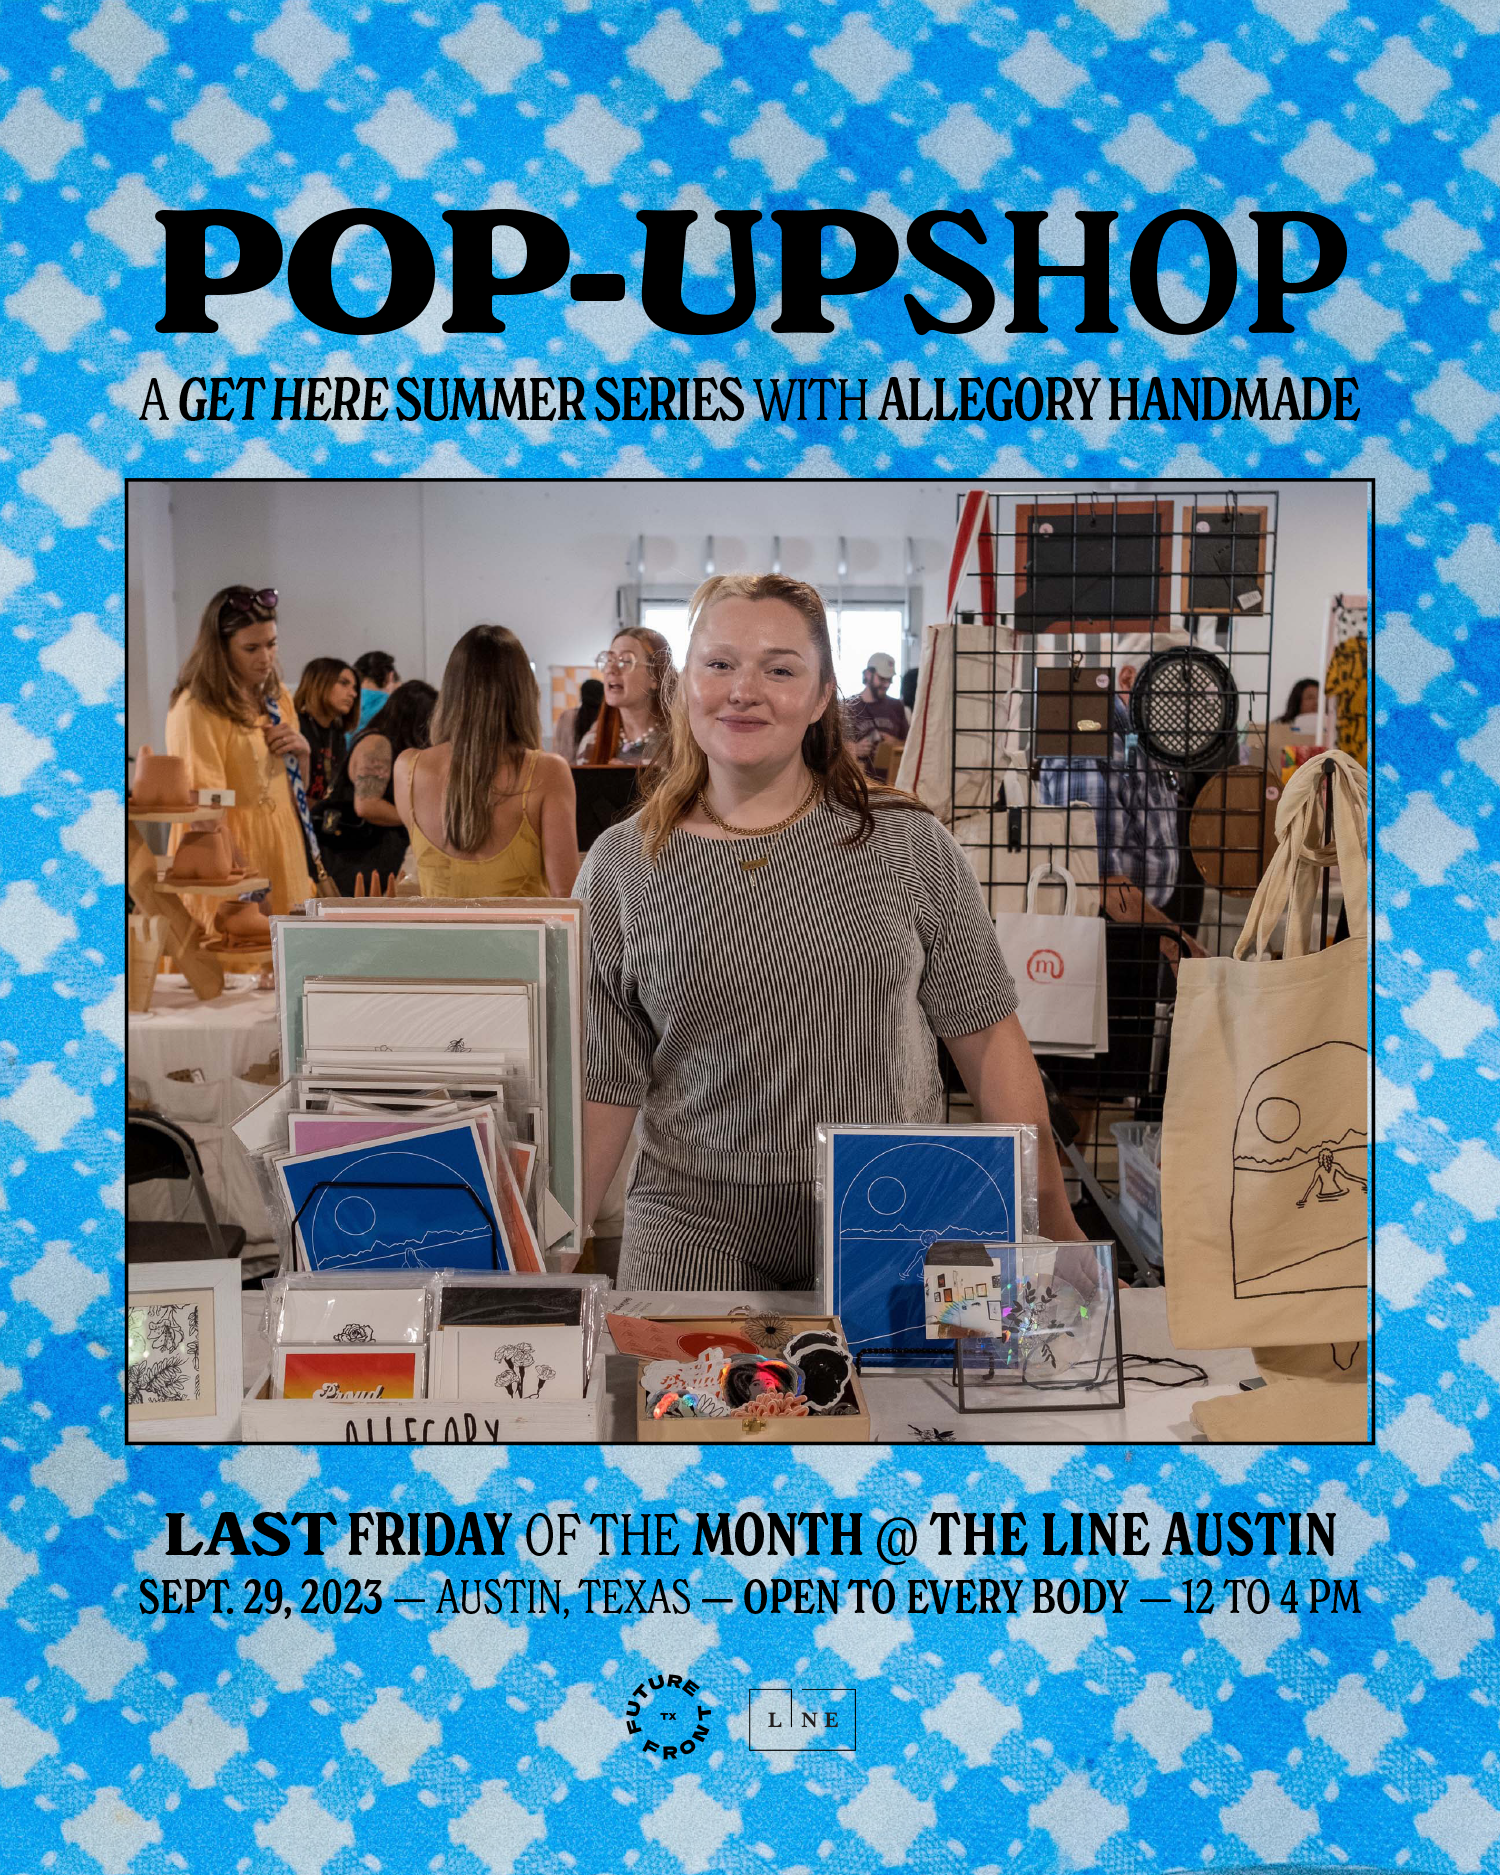 Summer Pop-up Shop by Future Front at the LINE Austin - featuring Allegory Handmade